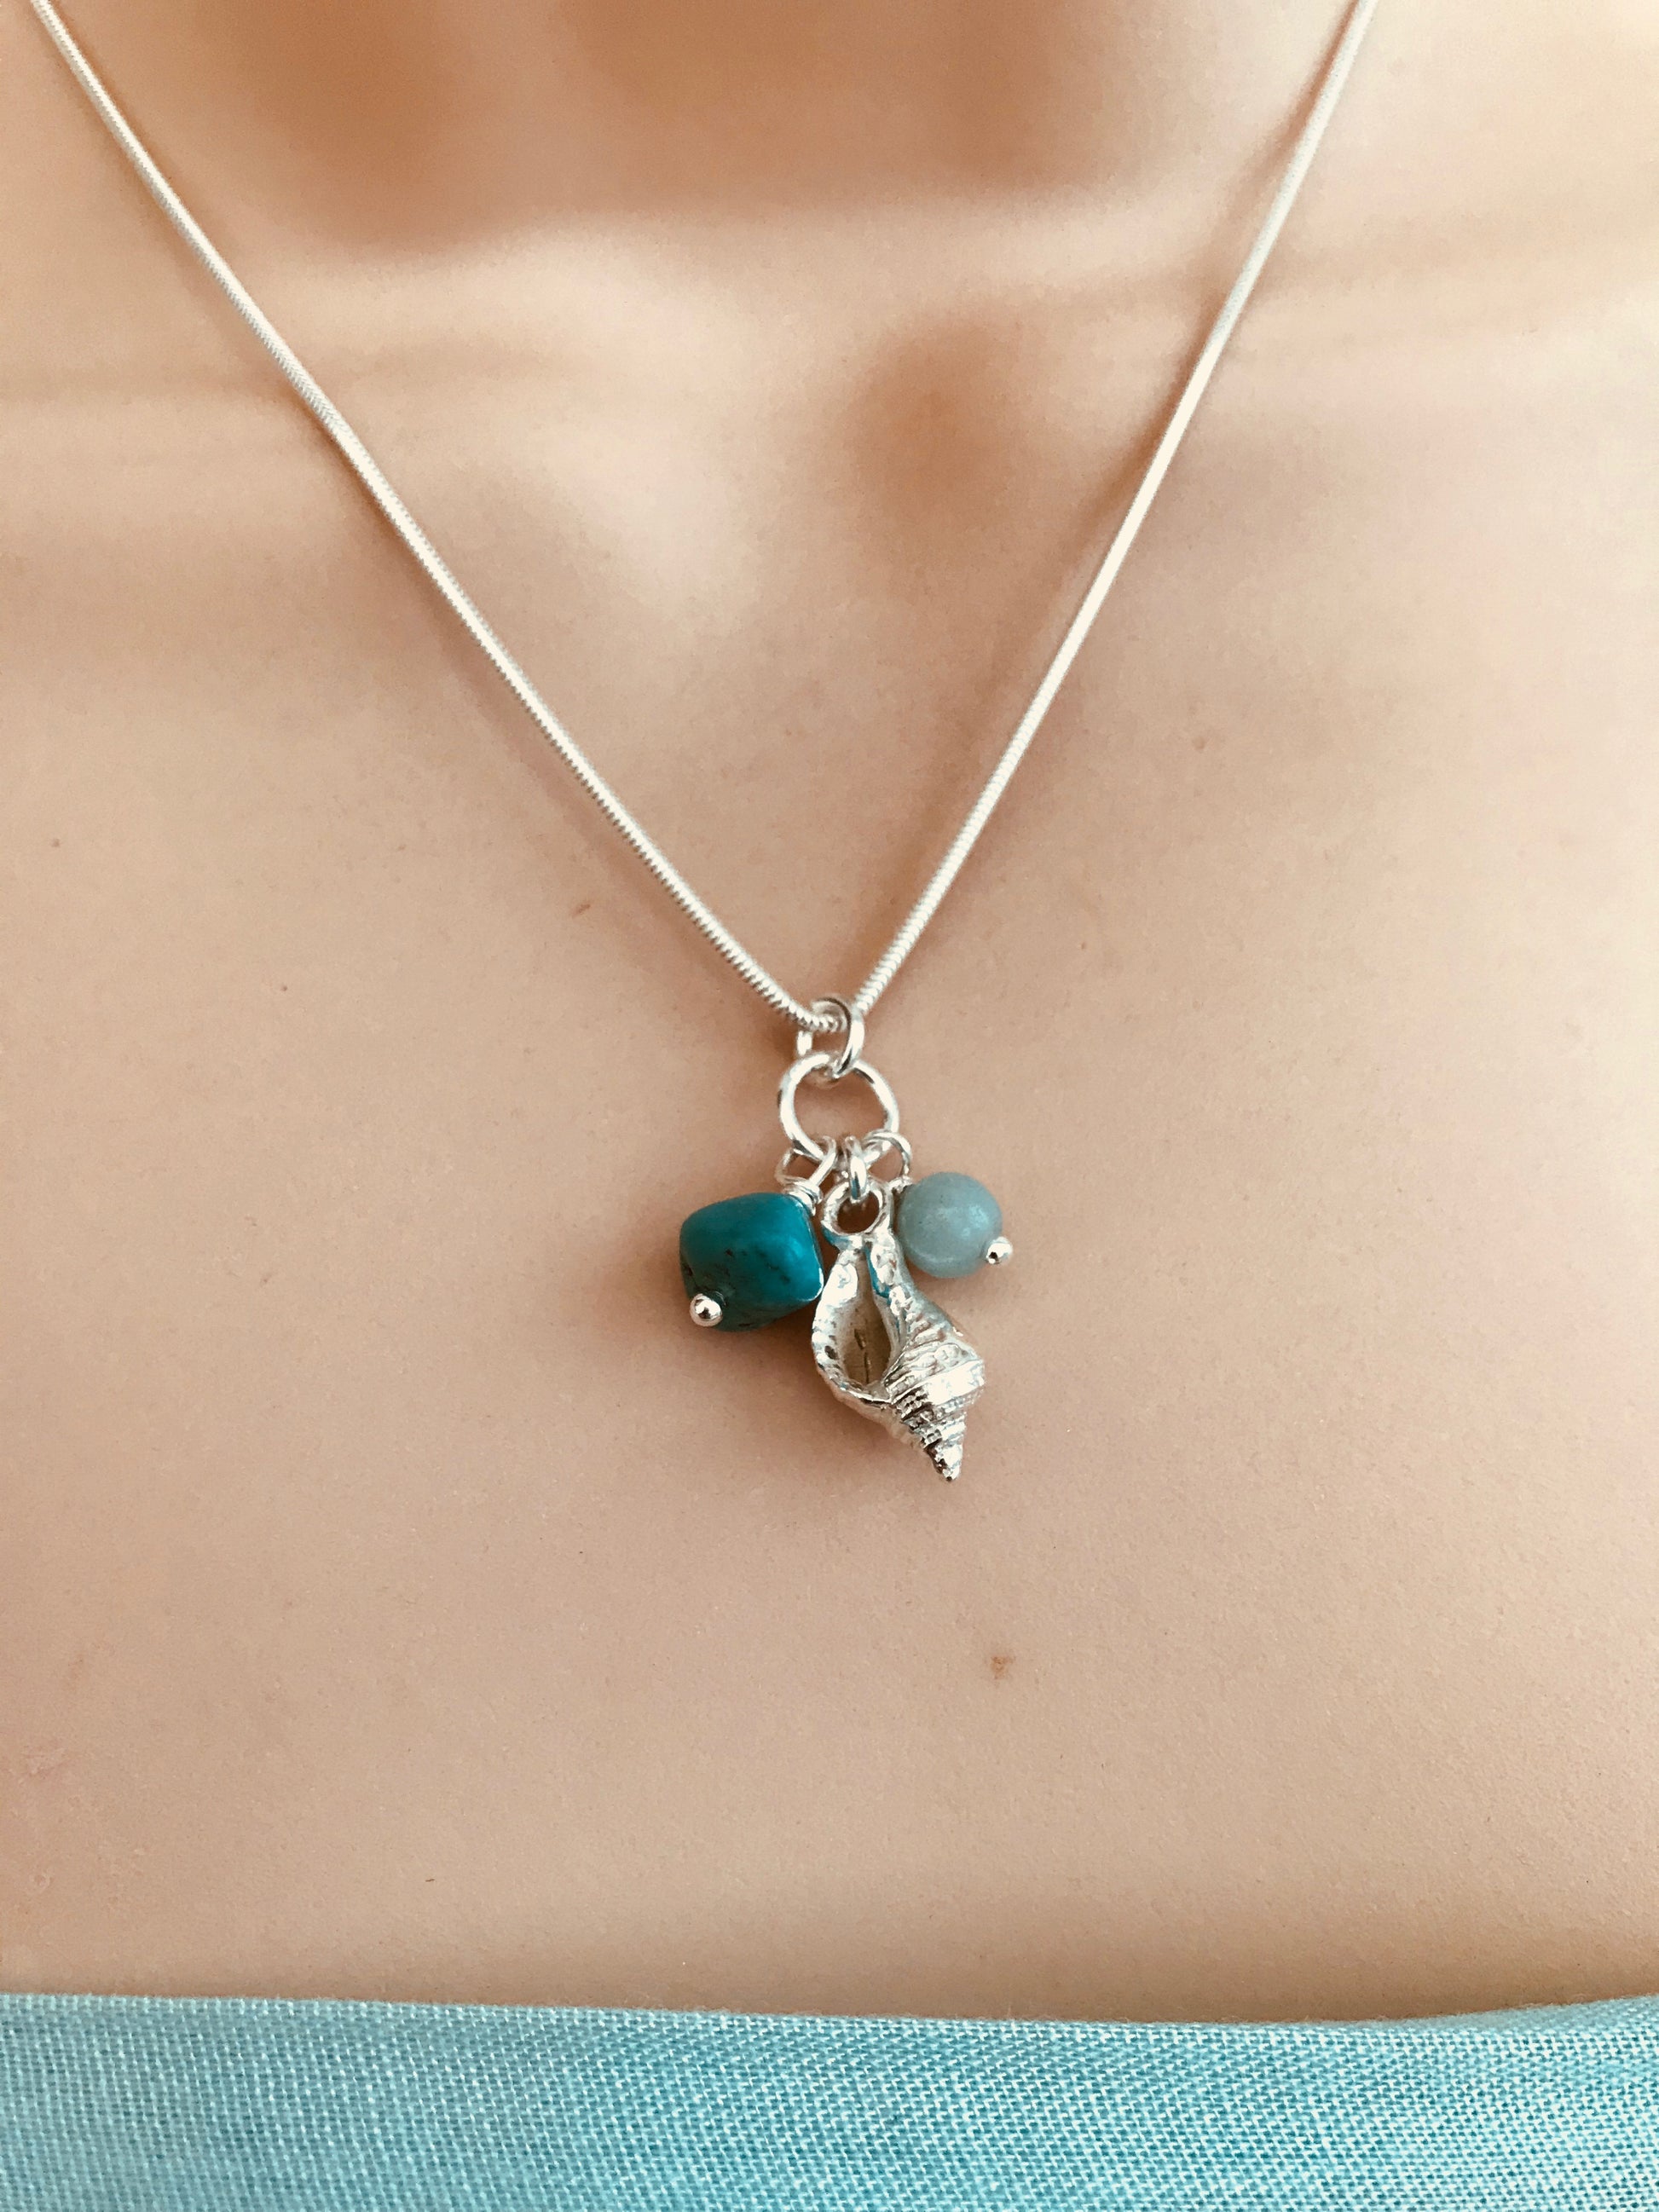 Silver whelk shell necklace with aqua coloured beads